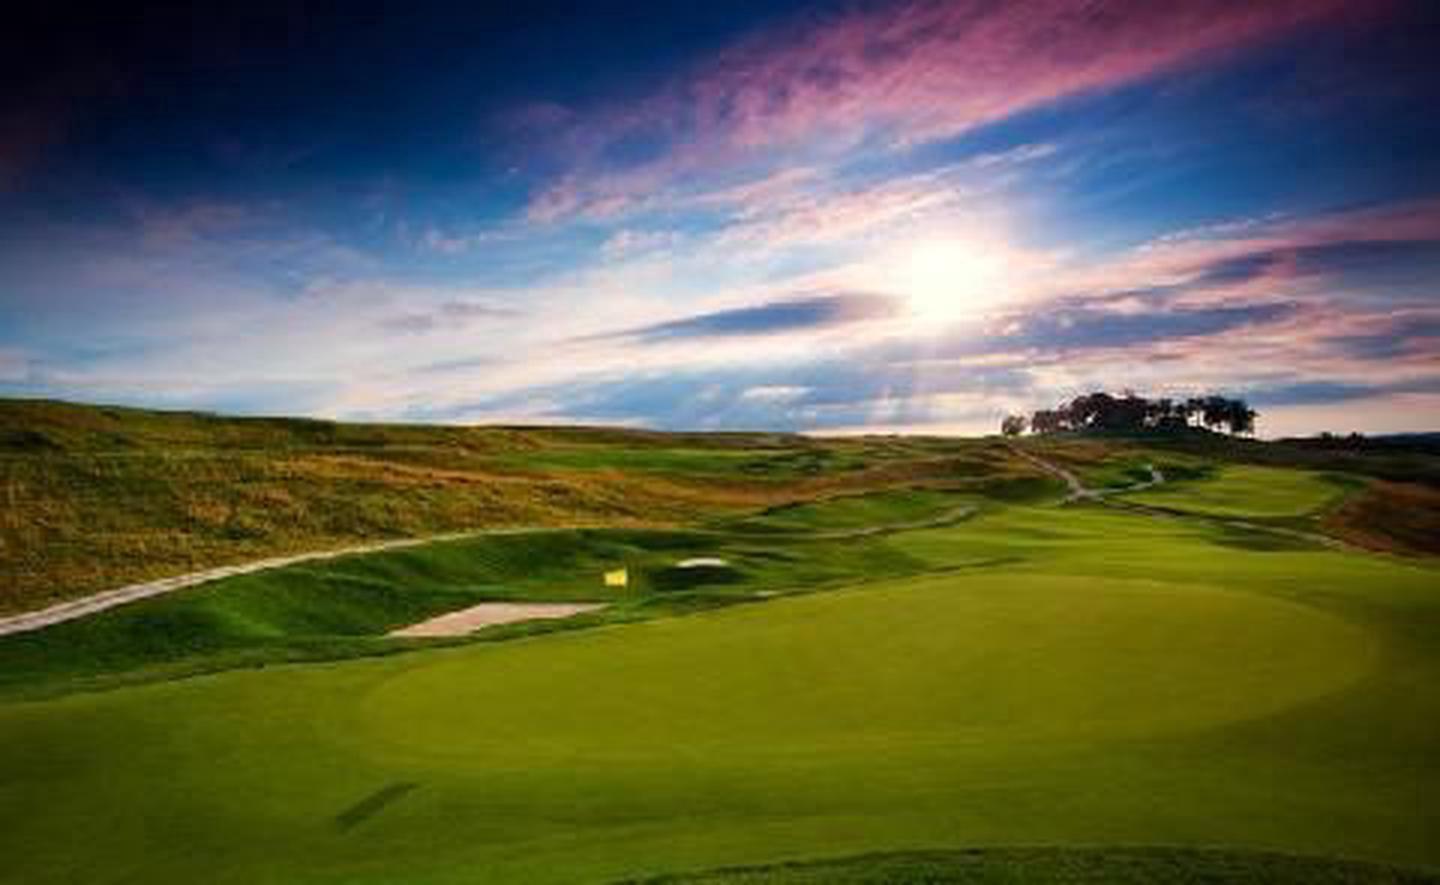 Donald Ross Golf CourseThis prolific Scot architect designed over 400 courses over the length of his 48 year career.